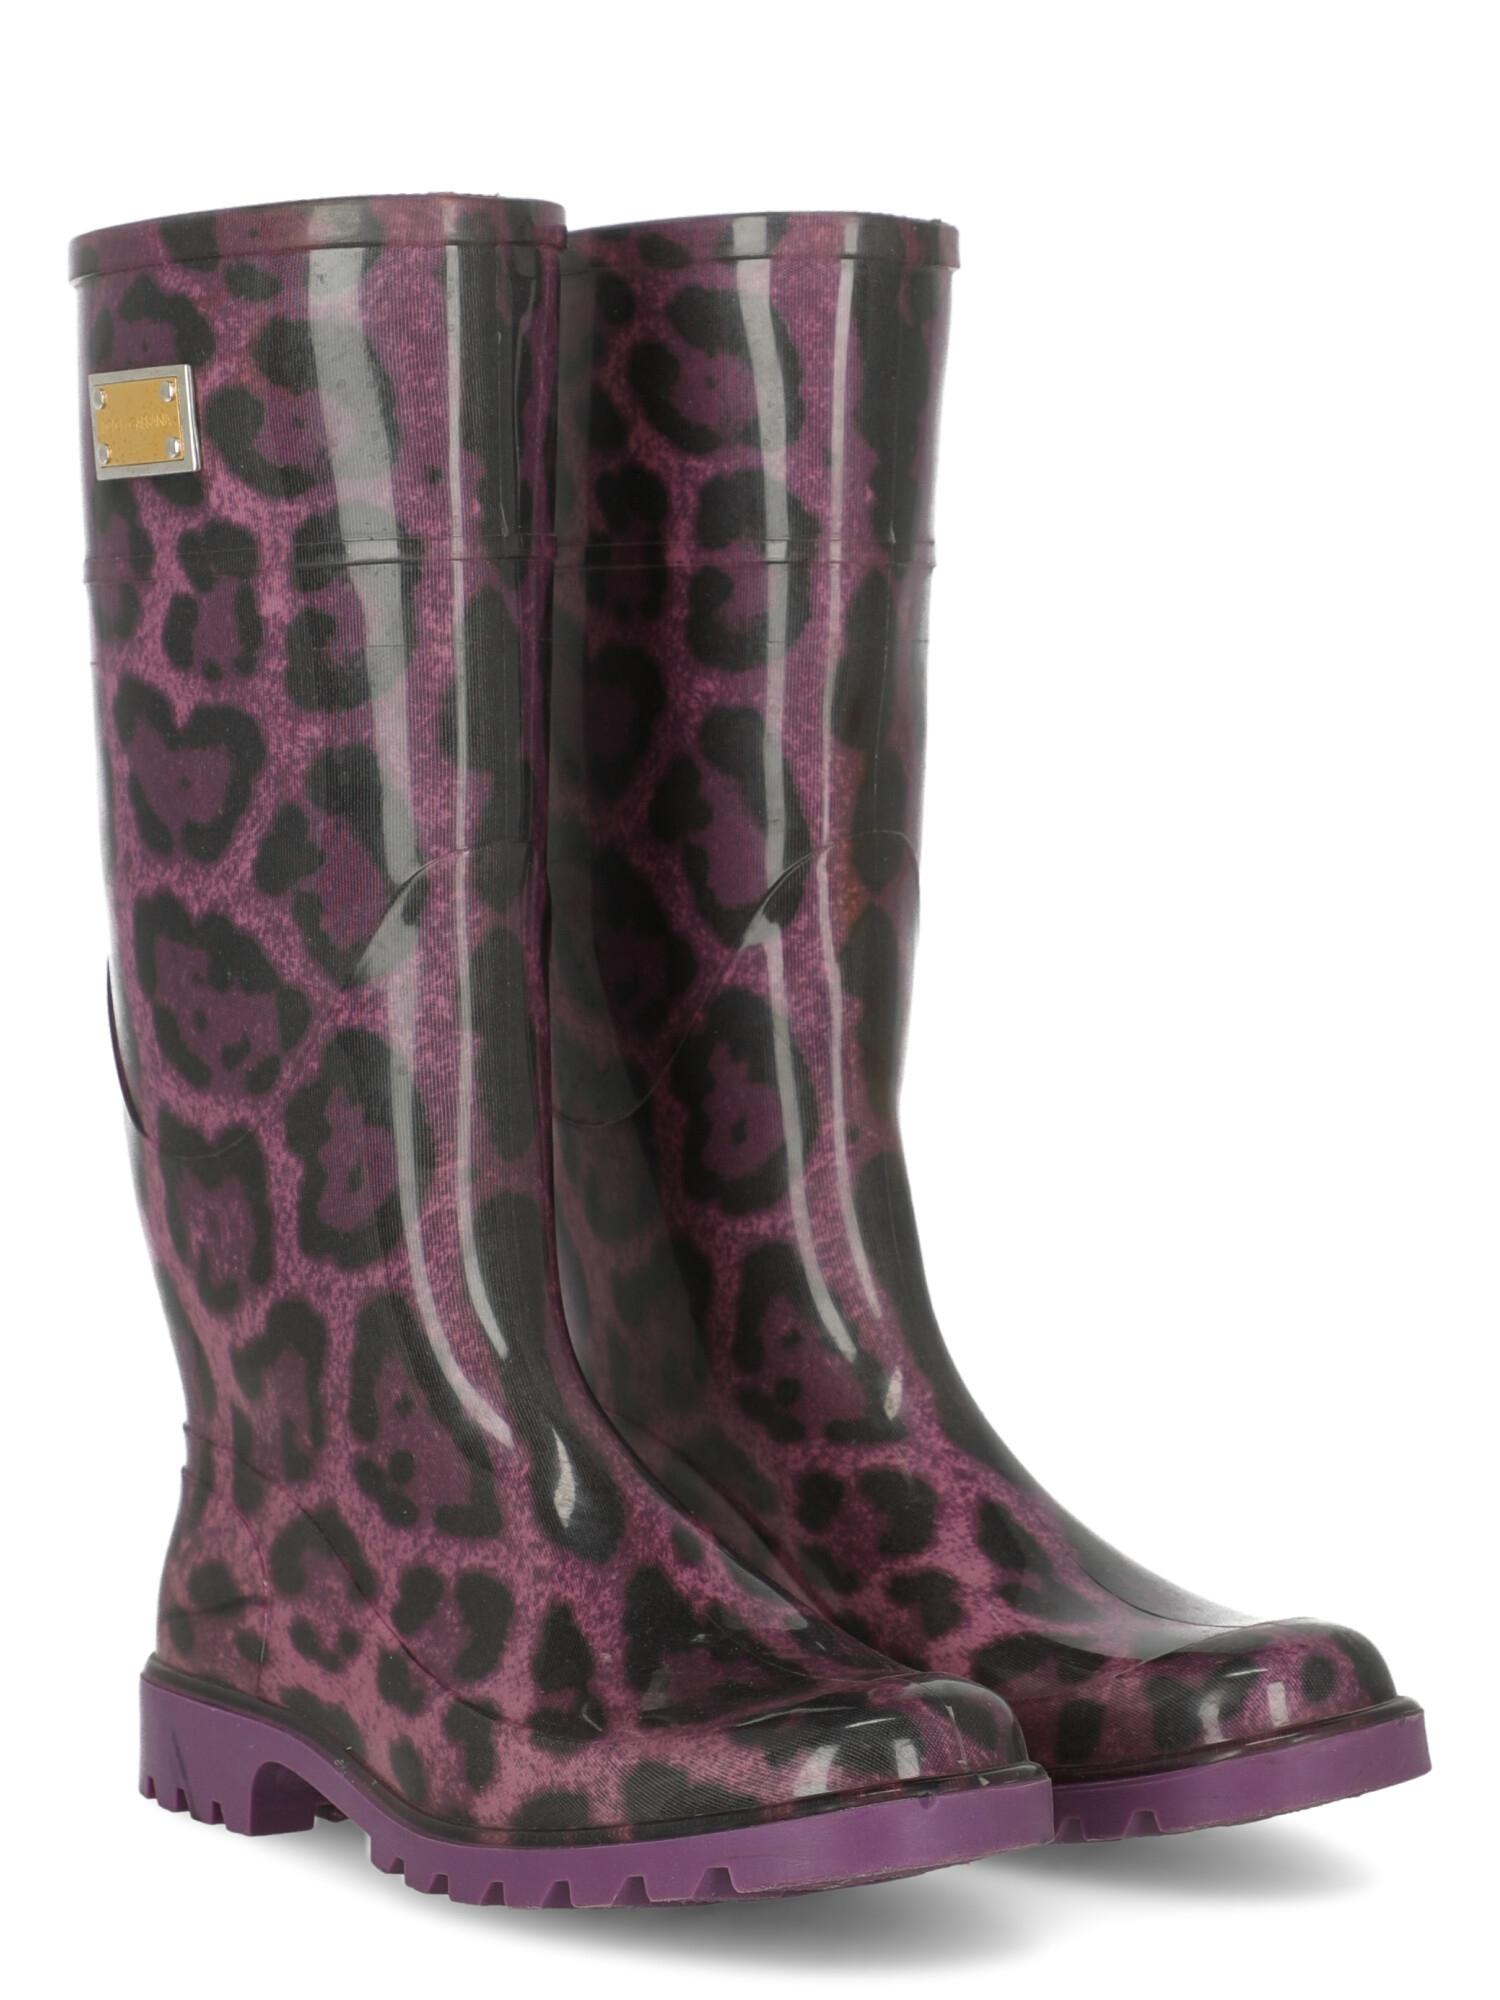 Boots, synthetic fibers, animal print, logo placard, side logo, gold-tone hardware, round toe.

Product Condition: Very Good
Sole: negligible signs of use, visible mark. Upper: negligible abrasions, slightly visible scratches, visible